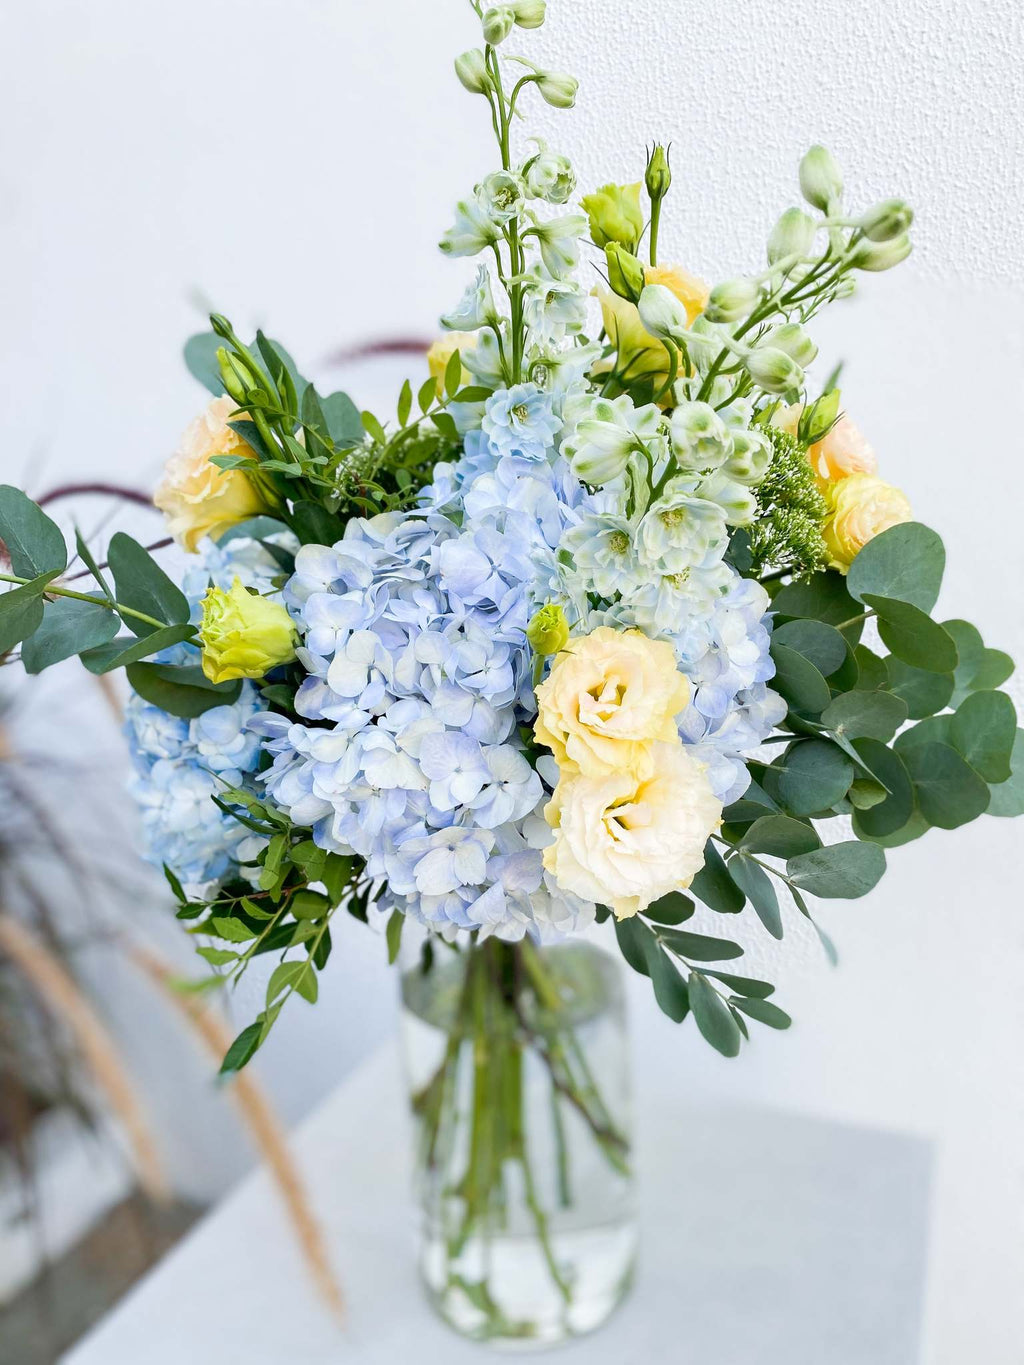 Valentine bouquet by Margot Floral Design. A fresh flower bouquet composed of Pale Yellow Roses, White Delphinium, Blue Hydrangea, and Eucalyptus. Large Size.